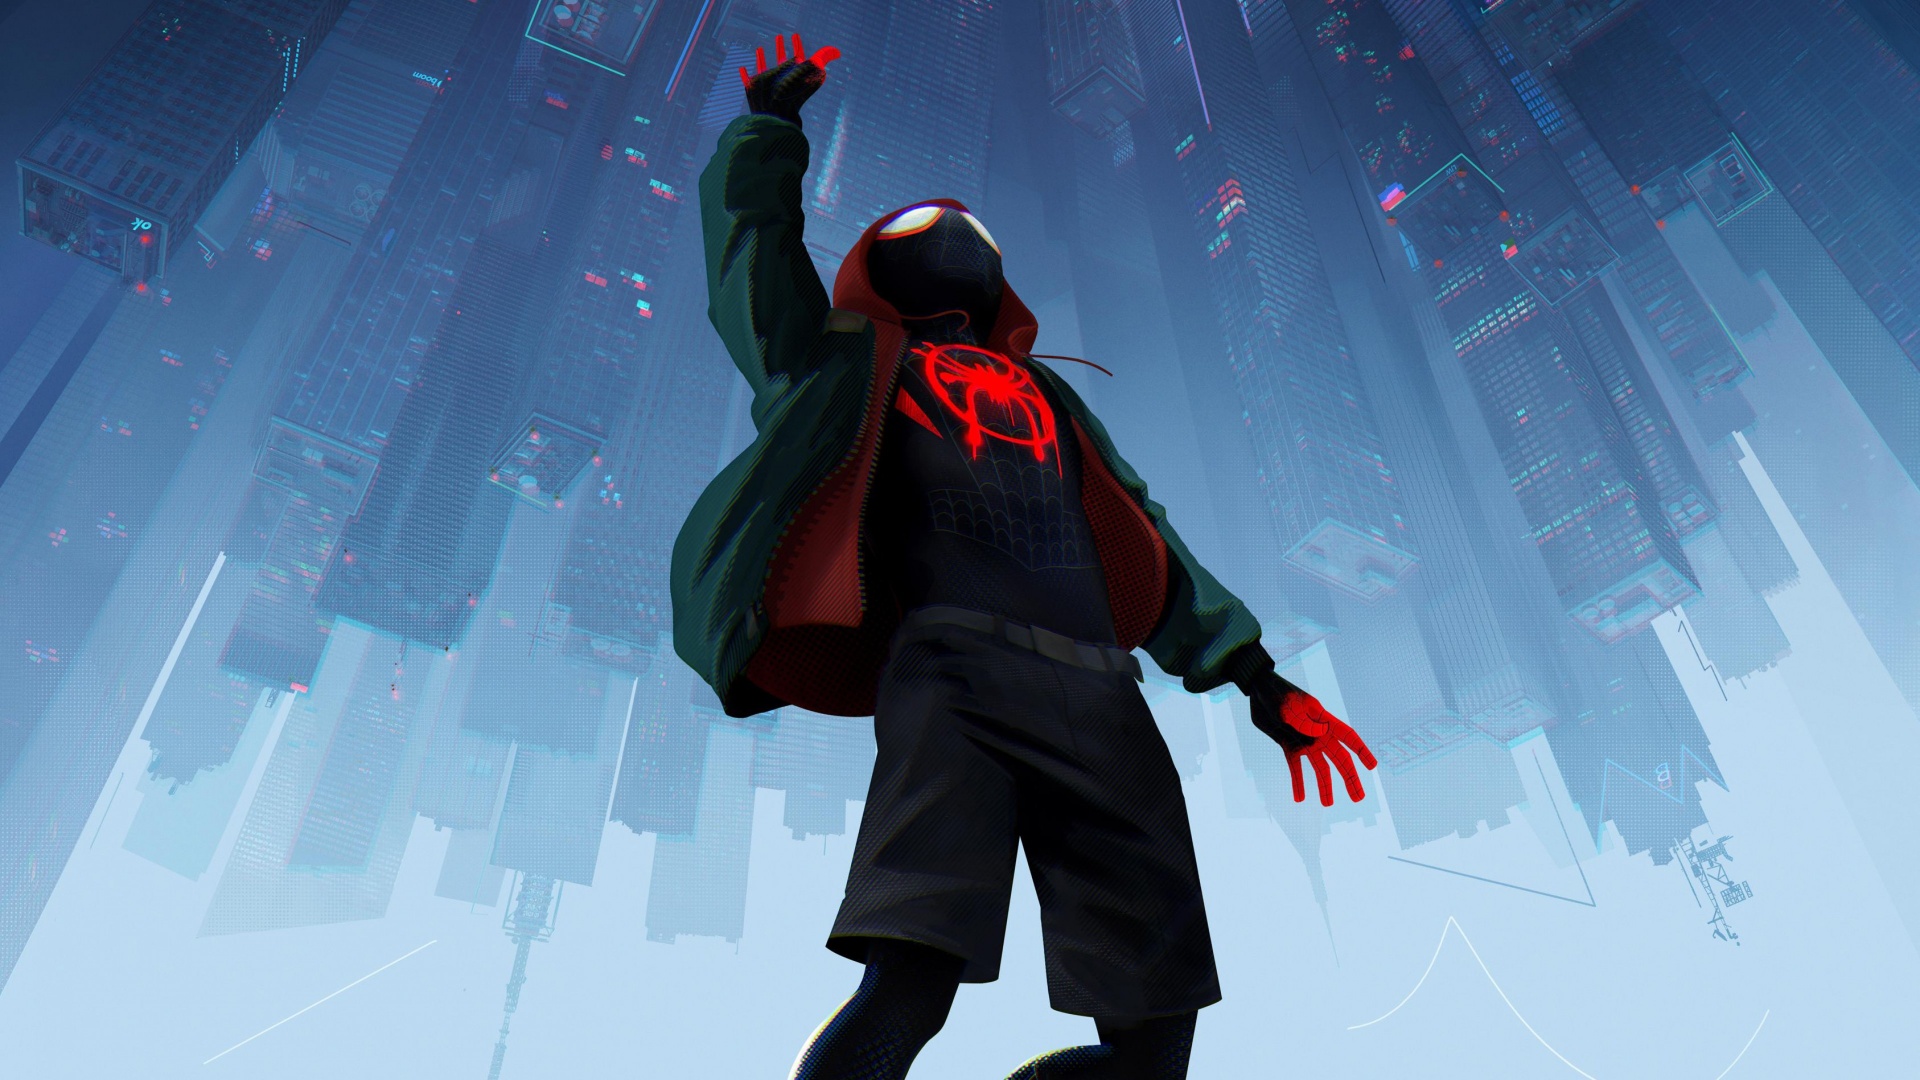 Spider man into the spider verse wallpaper Download on 24wallpaper